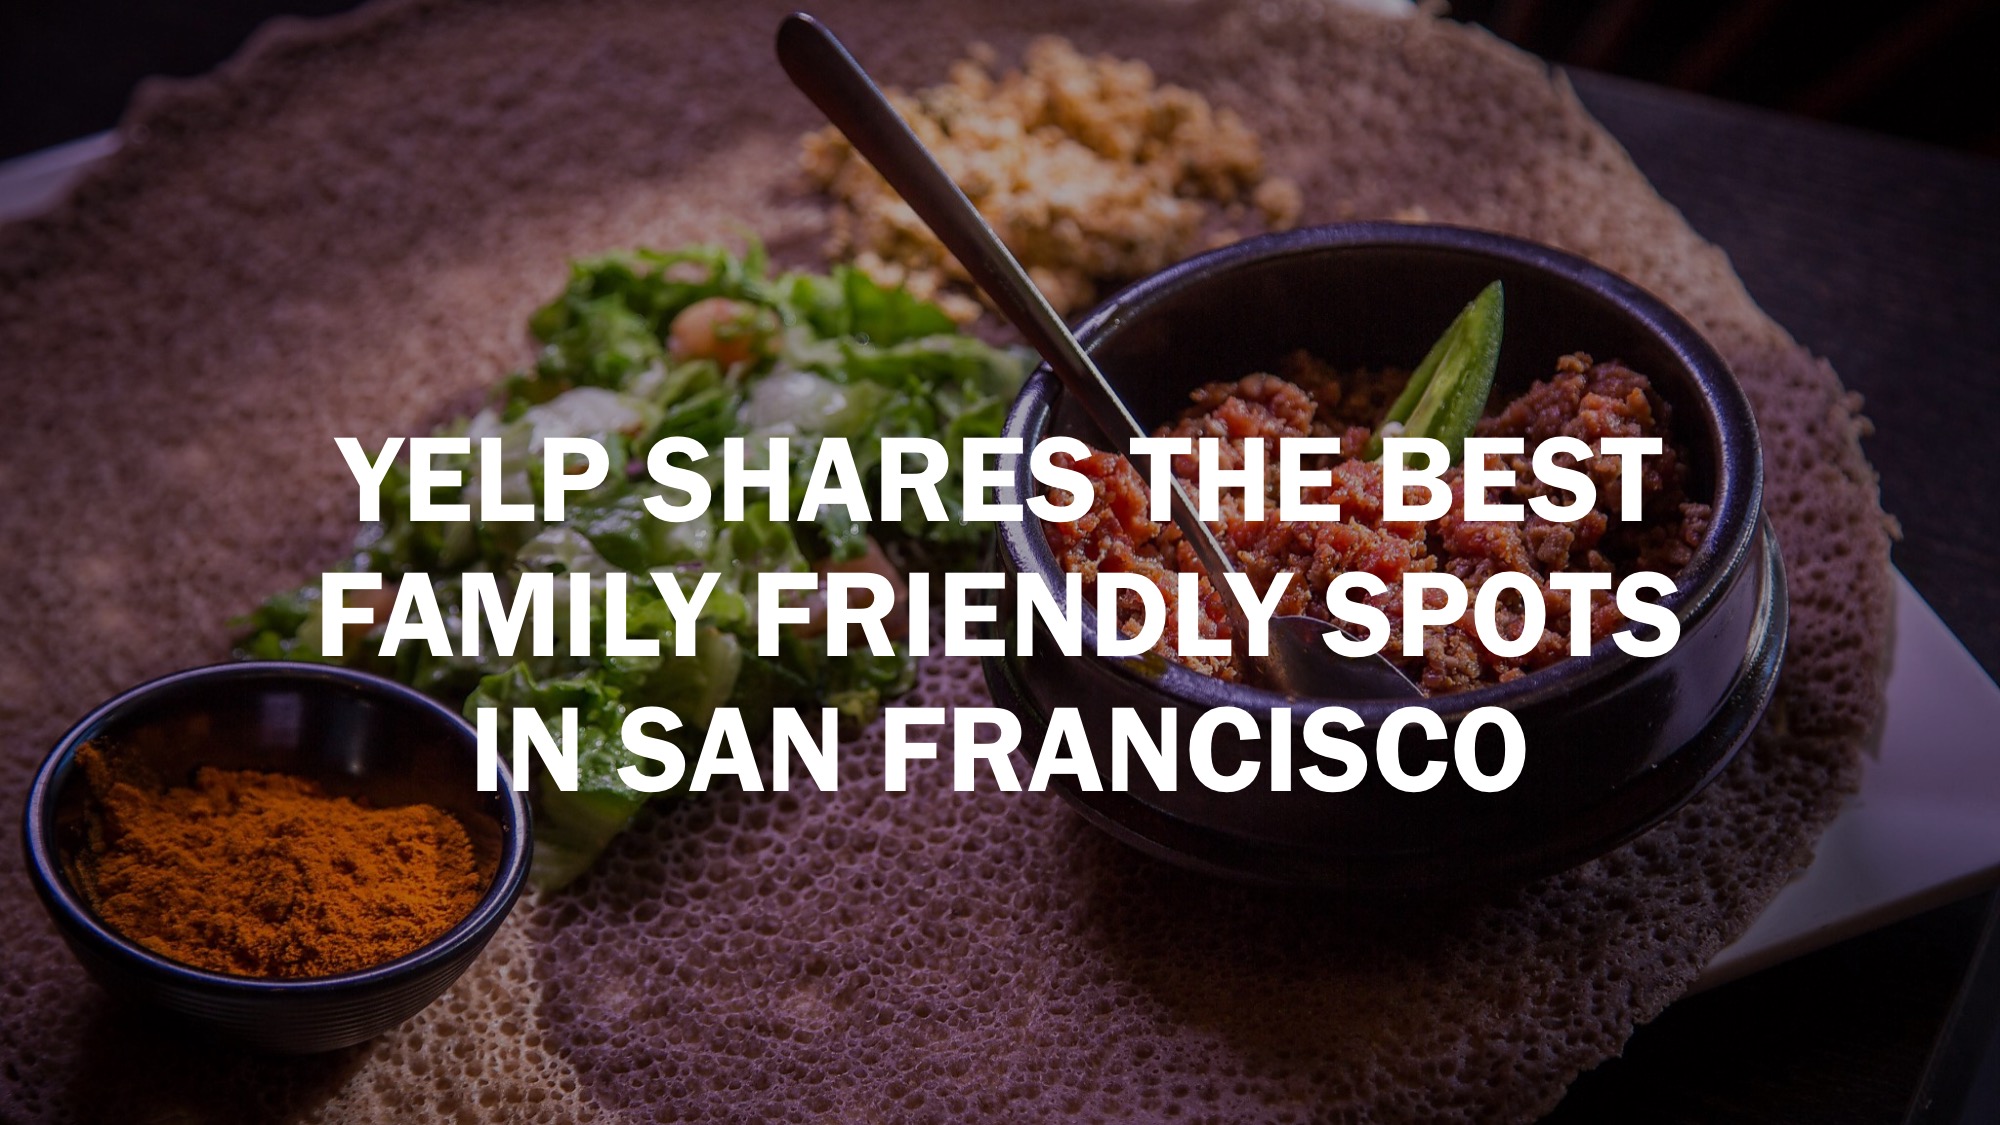 These are the best family friendly restaurants in San Francisco